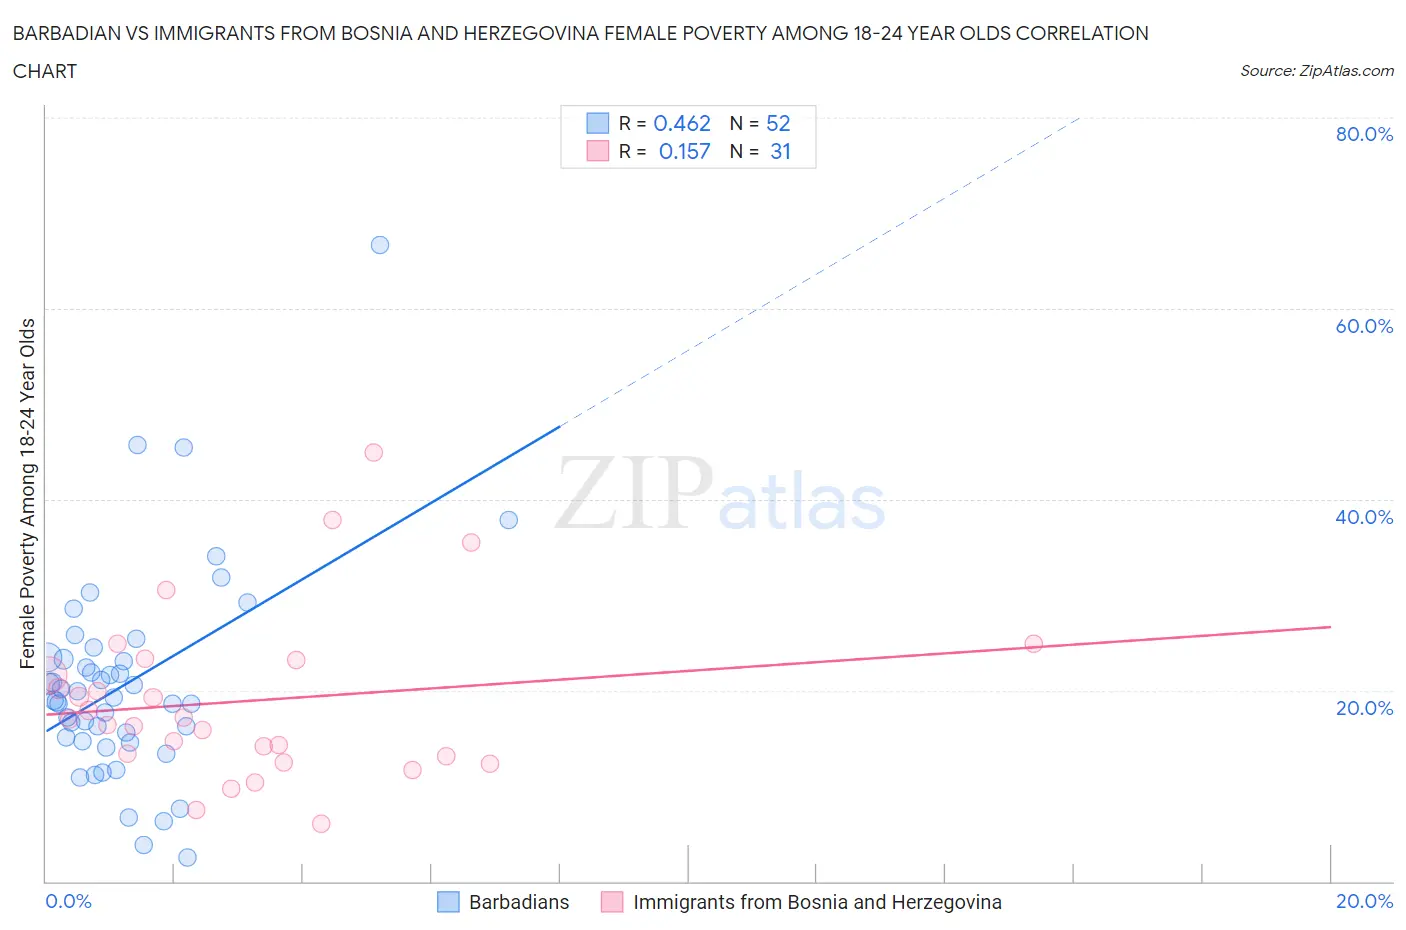 Barbadian vs Immigrants from Bosnia and Herzegovina Female Poverty Among 18-24 Year Olds